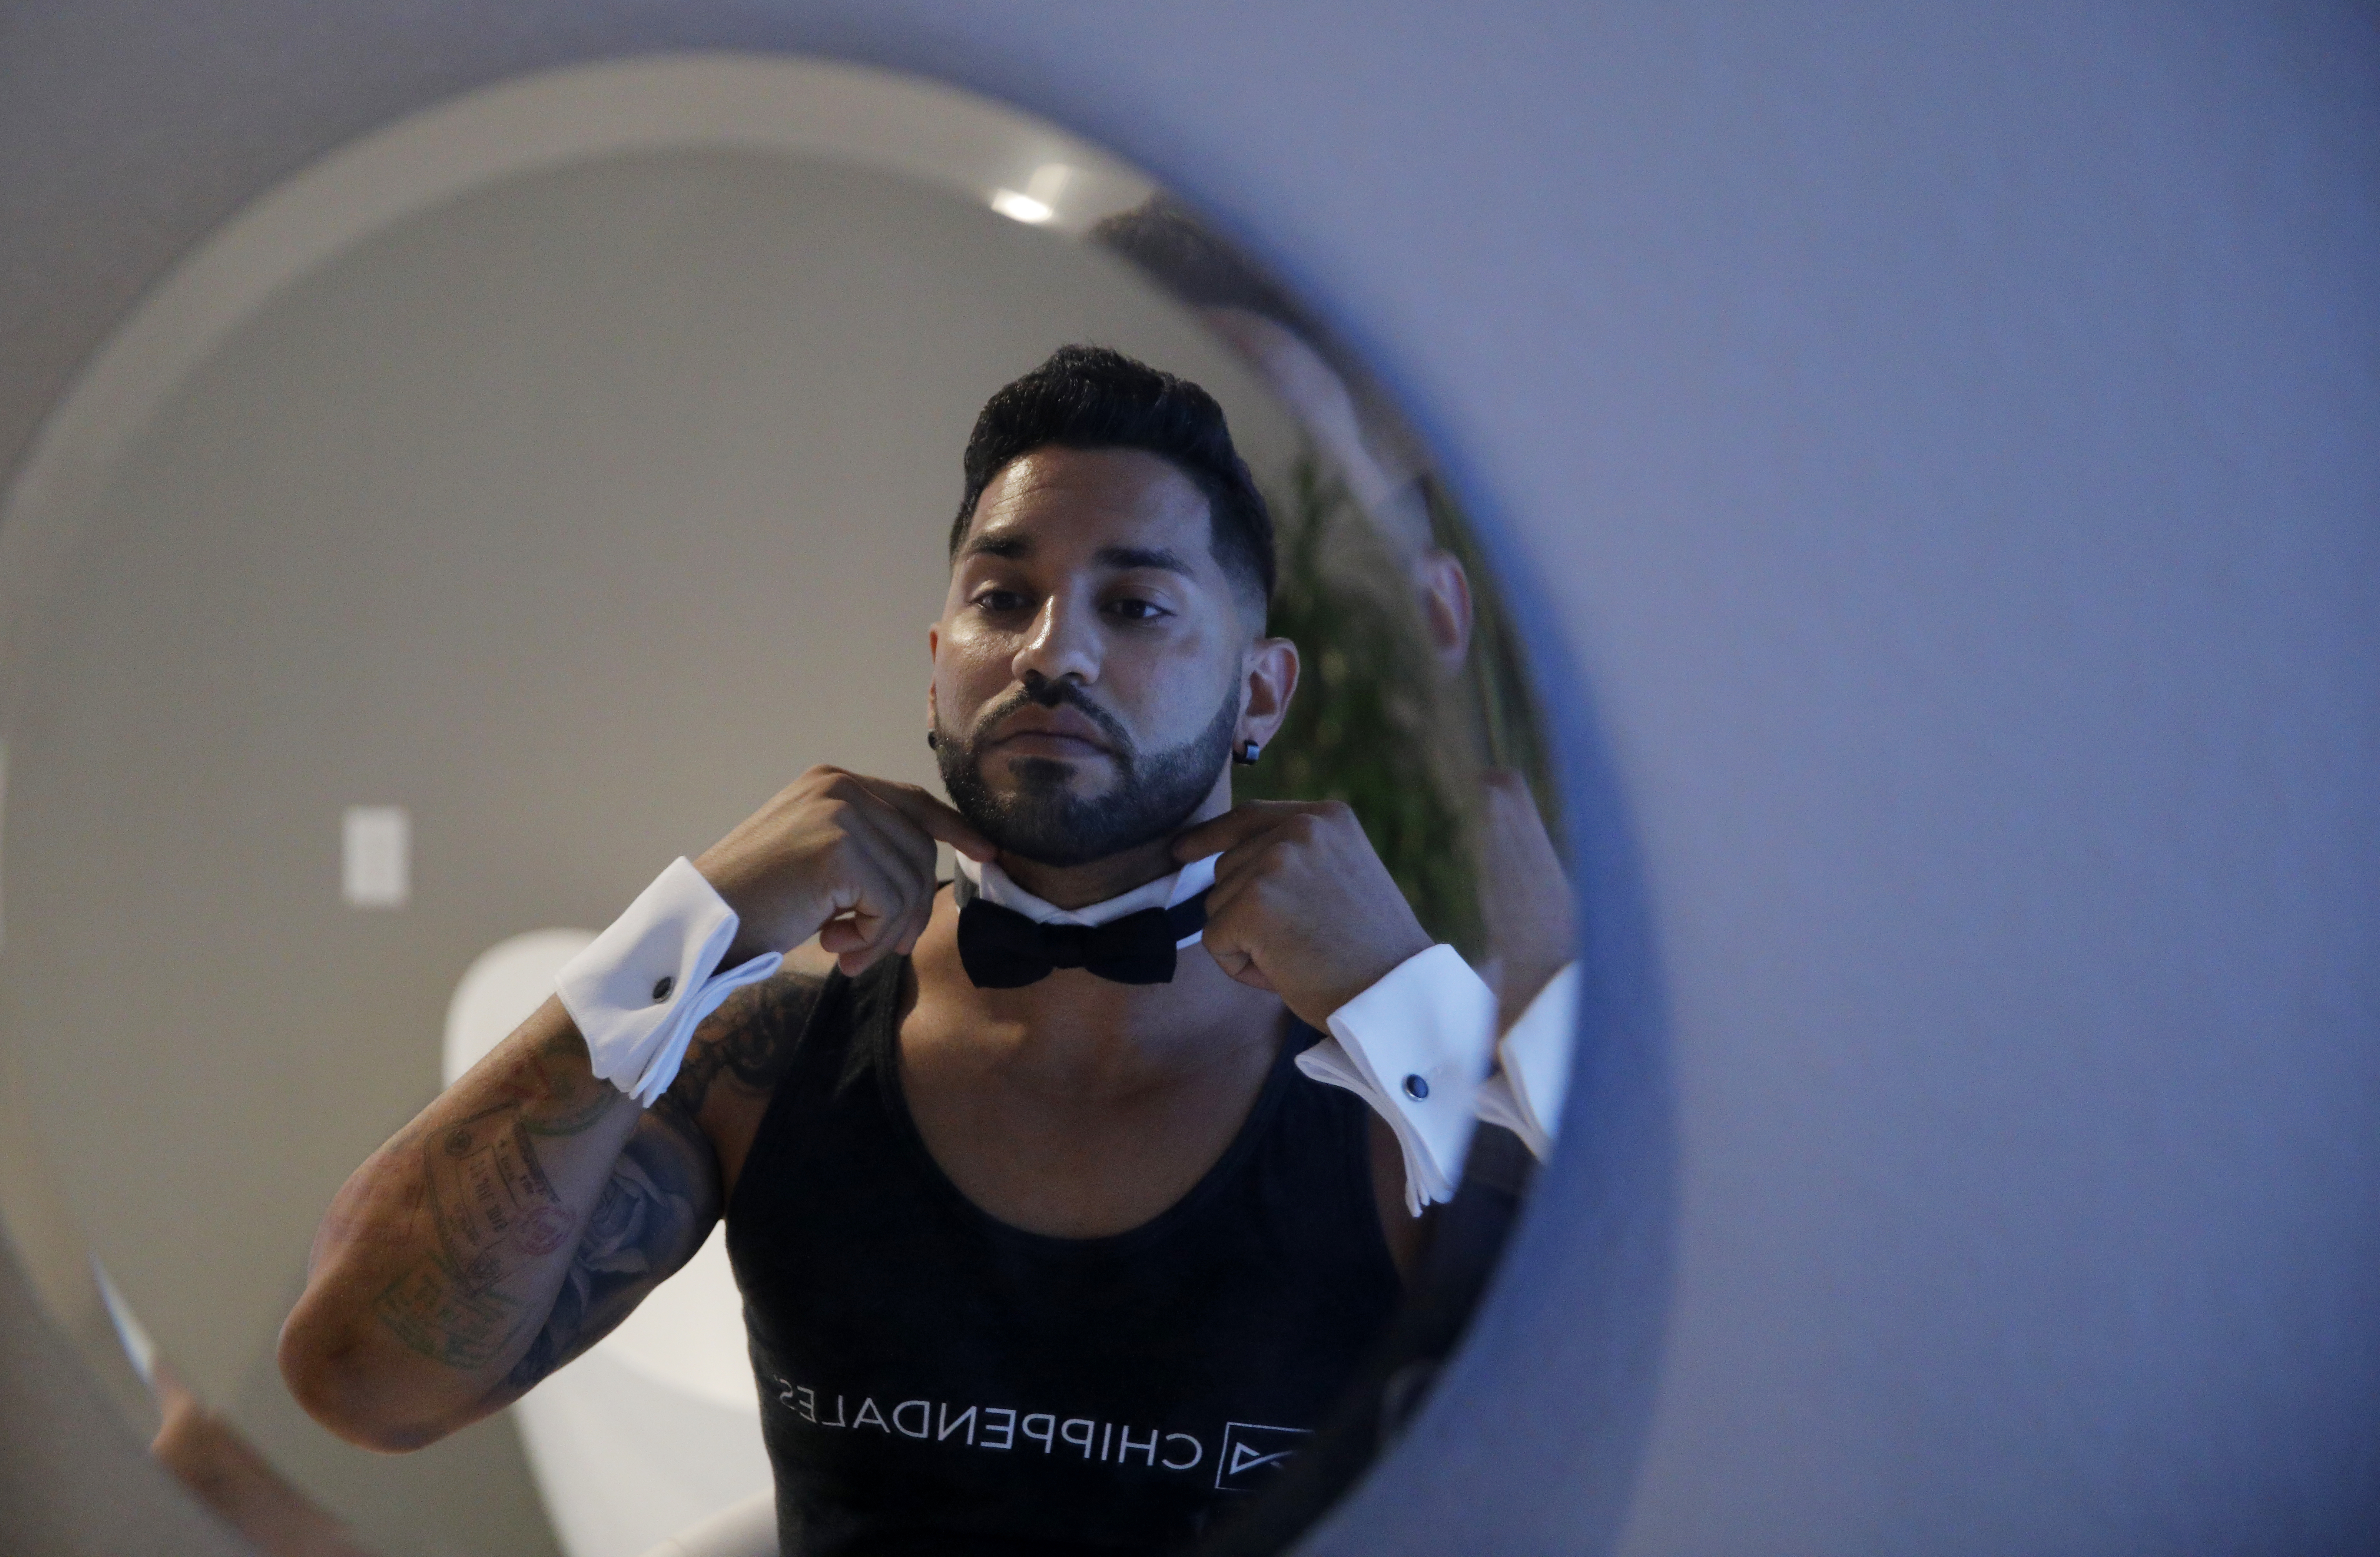 A Chippendales dancer wearing dress shirt cuffs adjusts a tuxedo collar in the mirror.